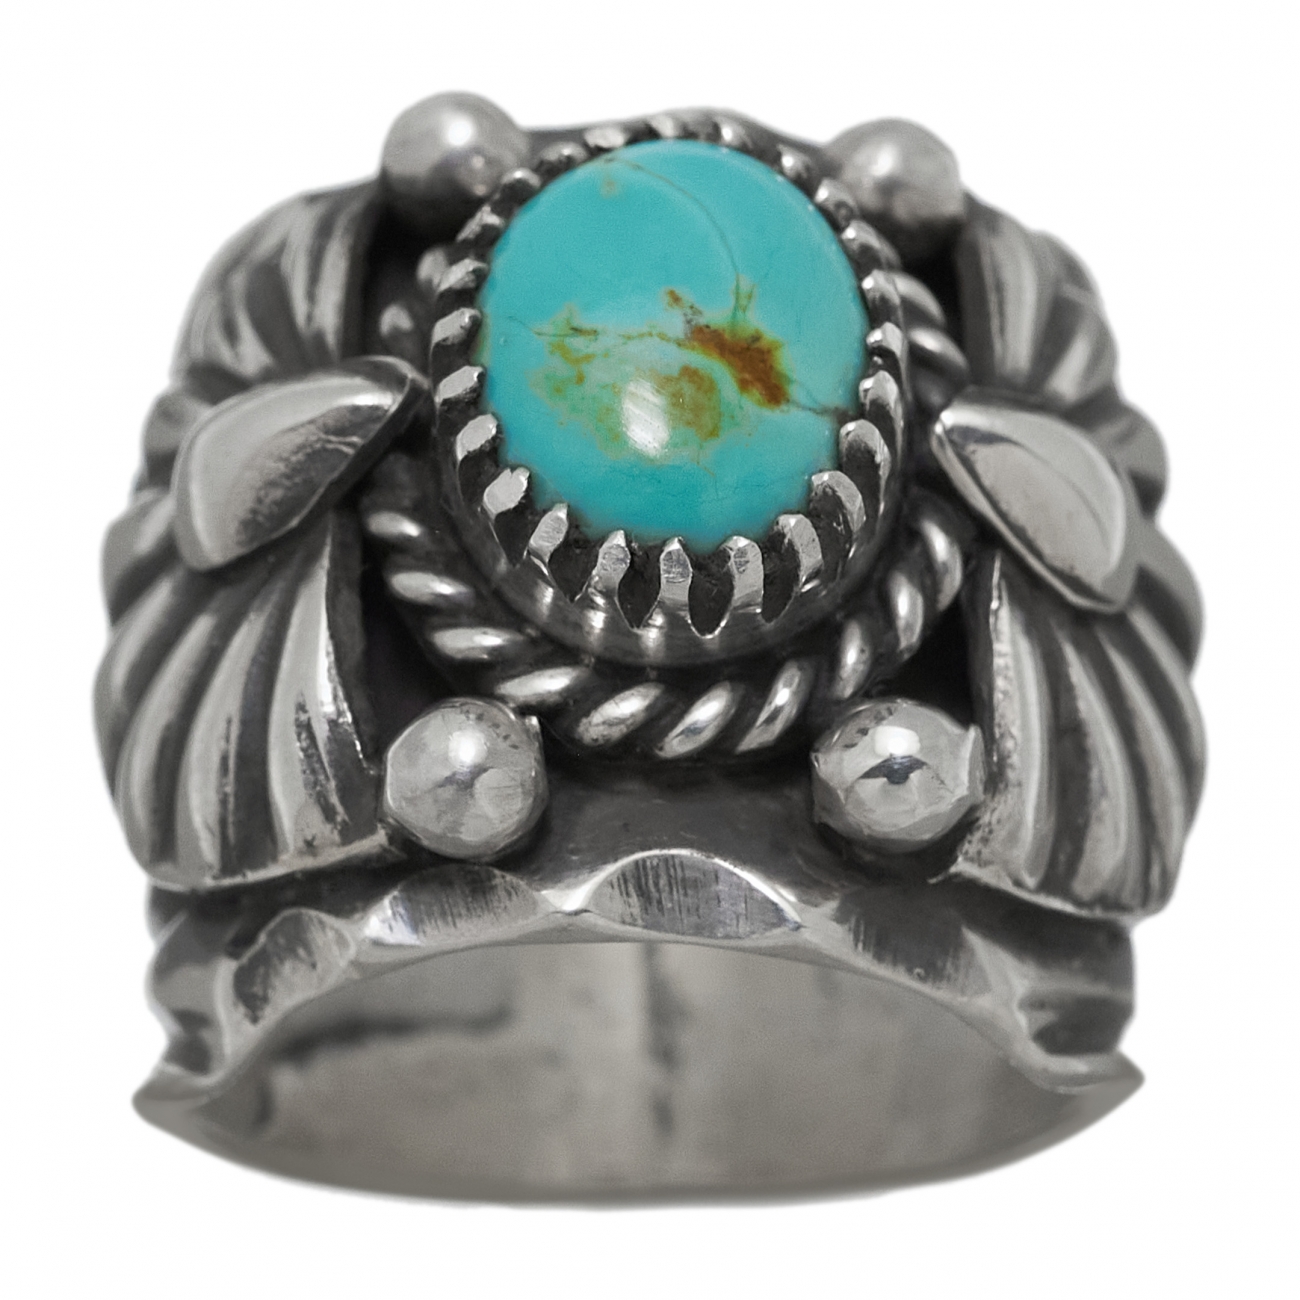 Navajo ring for women BA1136 in turquoise and silver - Harpo Paris